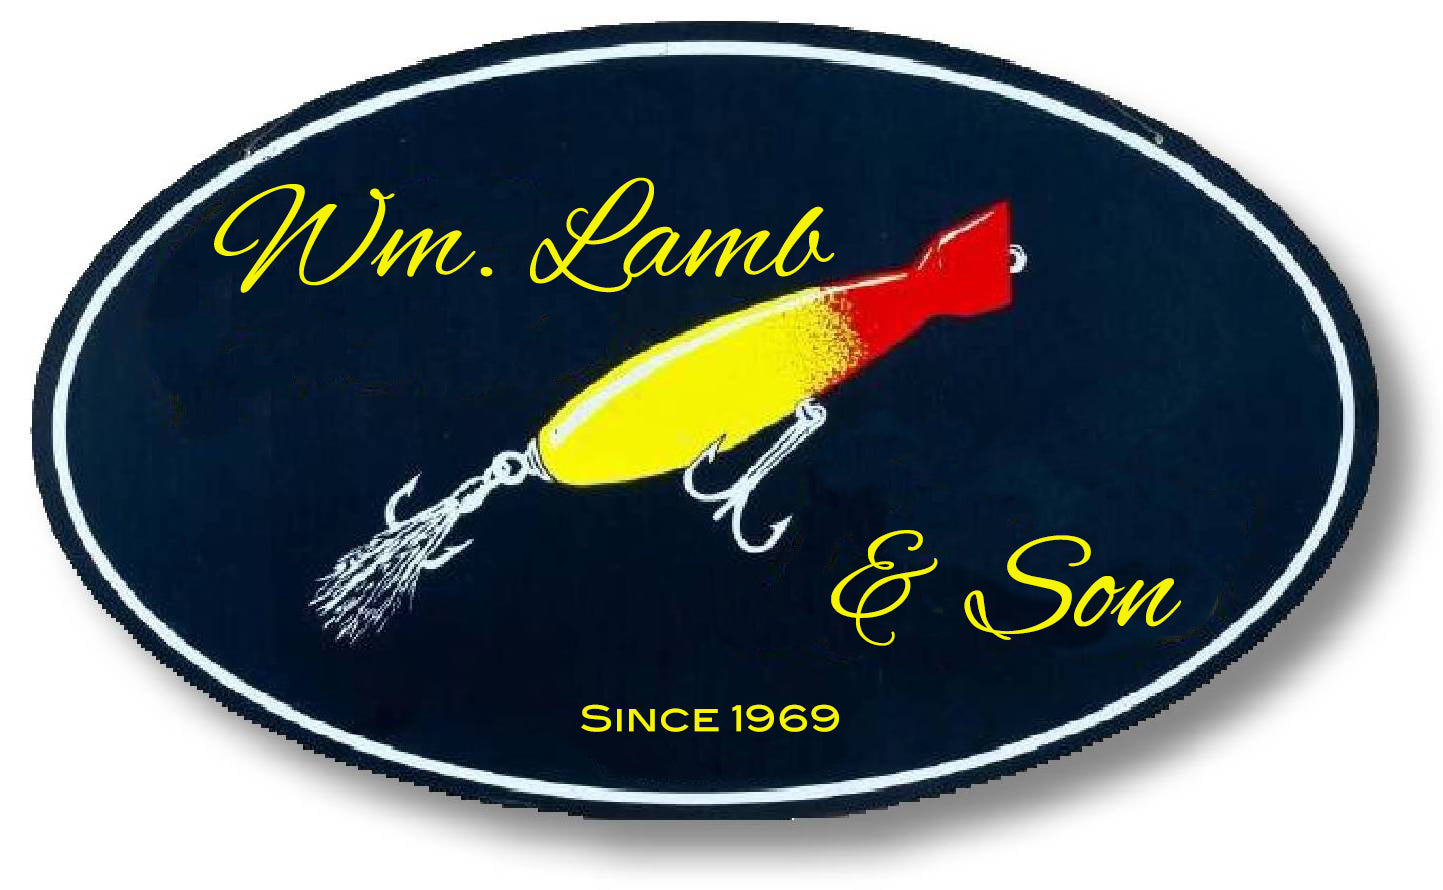 Decals - The Lure – Wm Lamb & Son